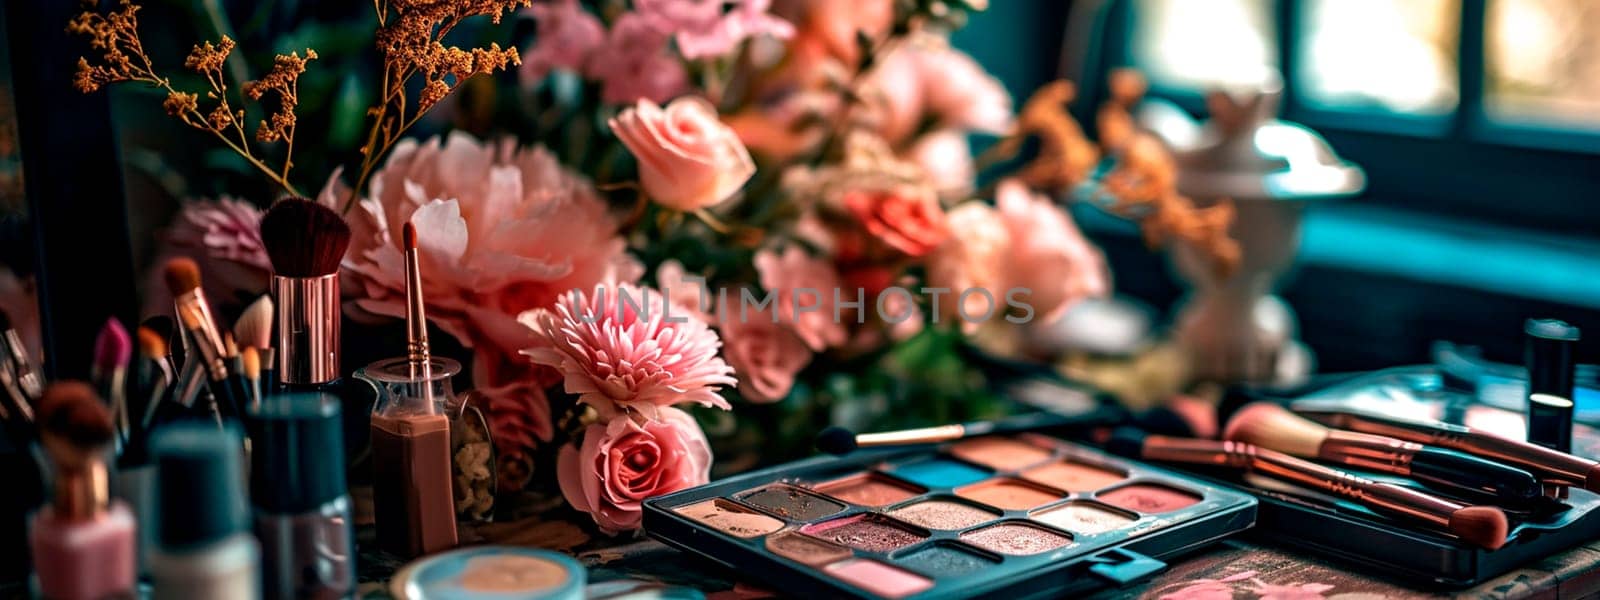 Decorative cosmetics for makeup, brush in hands and flowers. Selective focus. Nature.